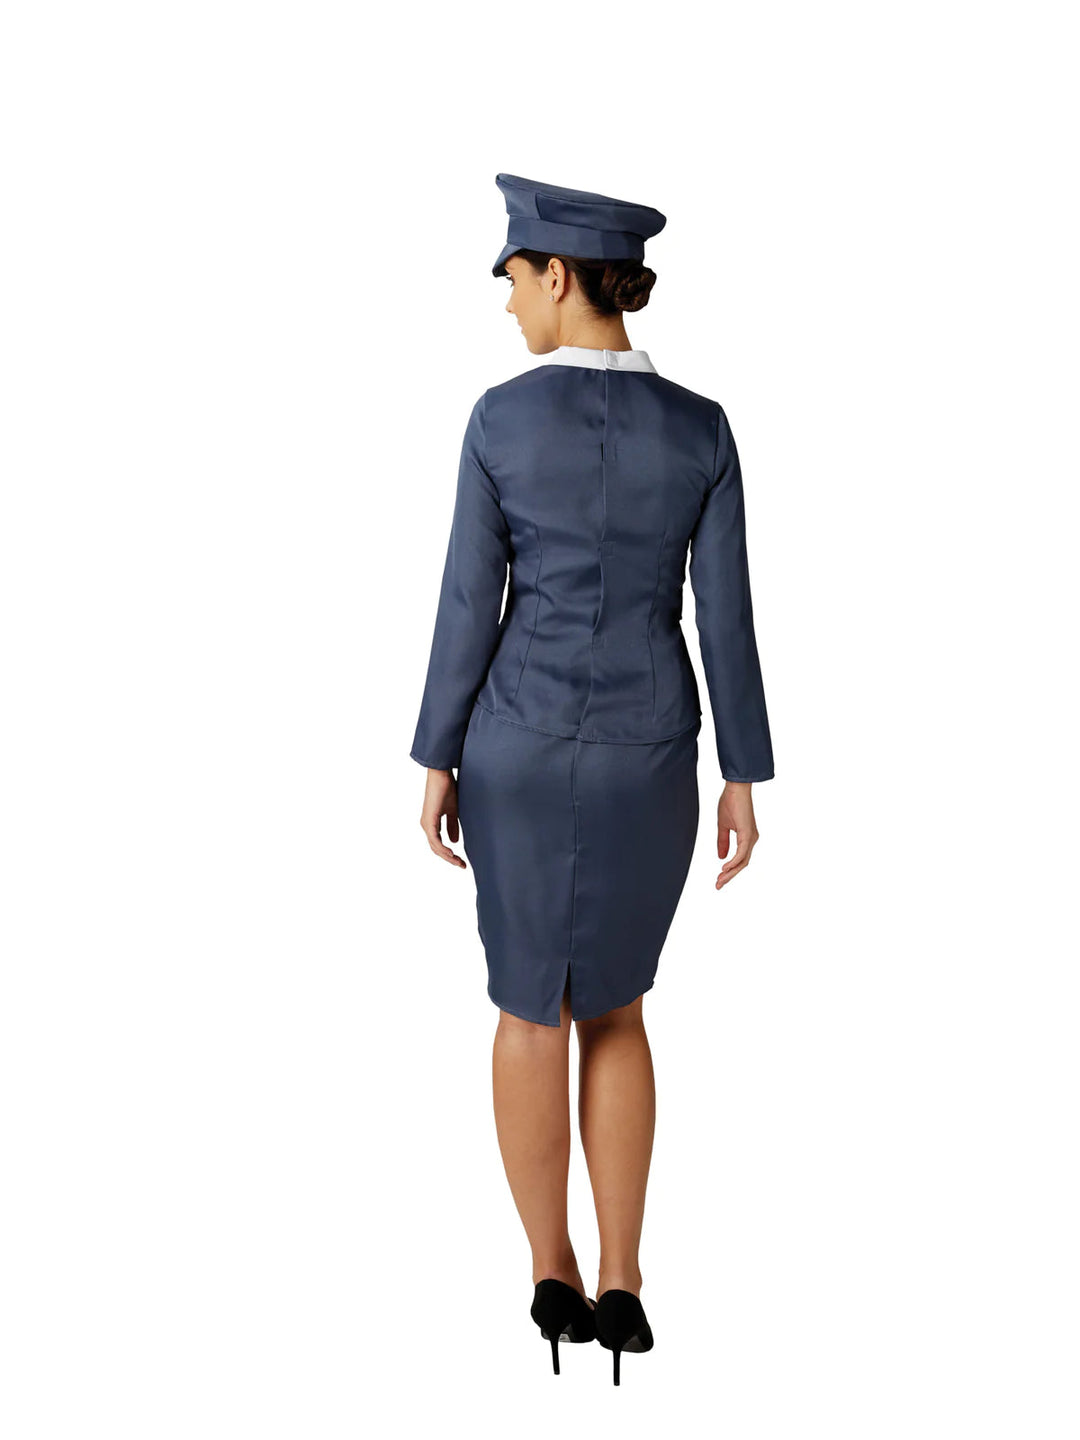 Womens RAF Girl Costume Military Suit